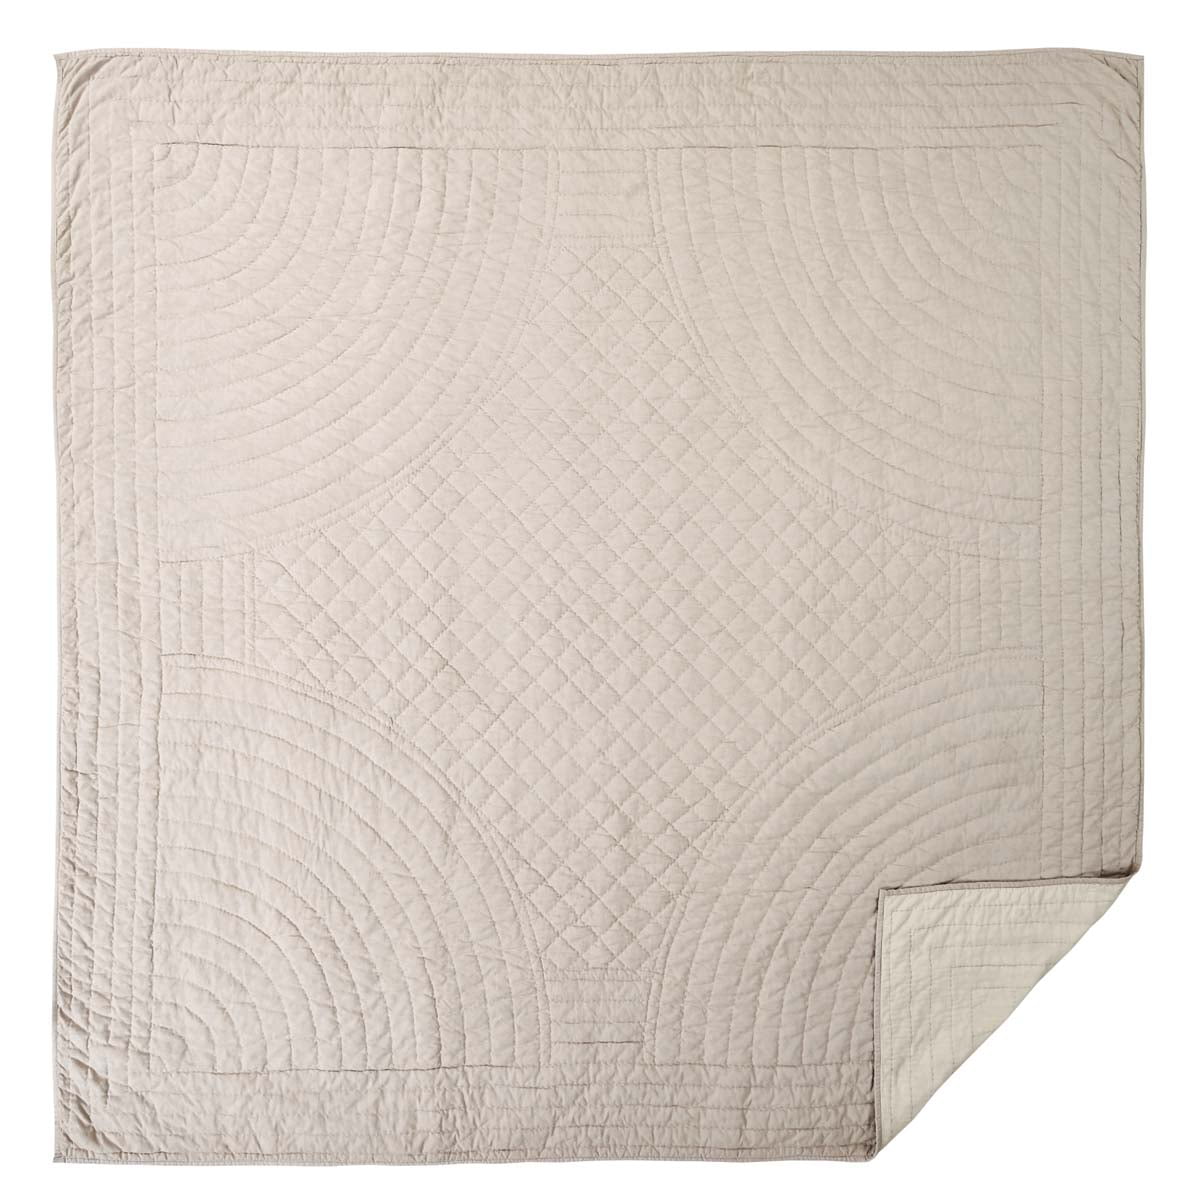 Farmhouse Greige Tan Solid Color Cotton Linen Blend Charlotte Bedding Pre-Washed Textured Square Queen Quilt